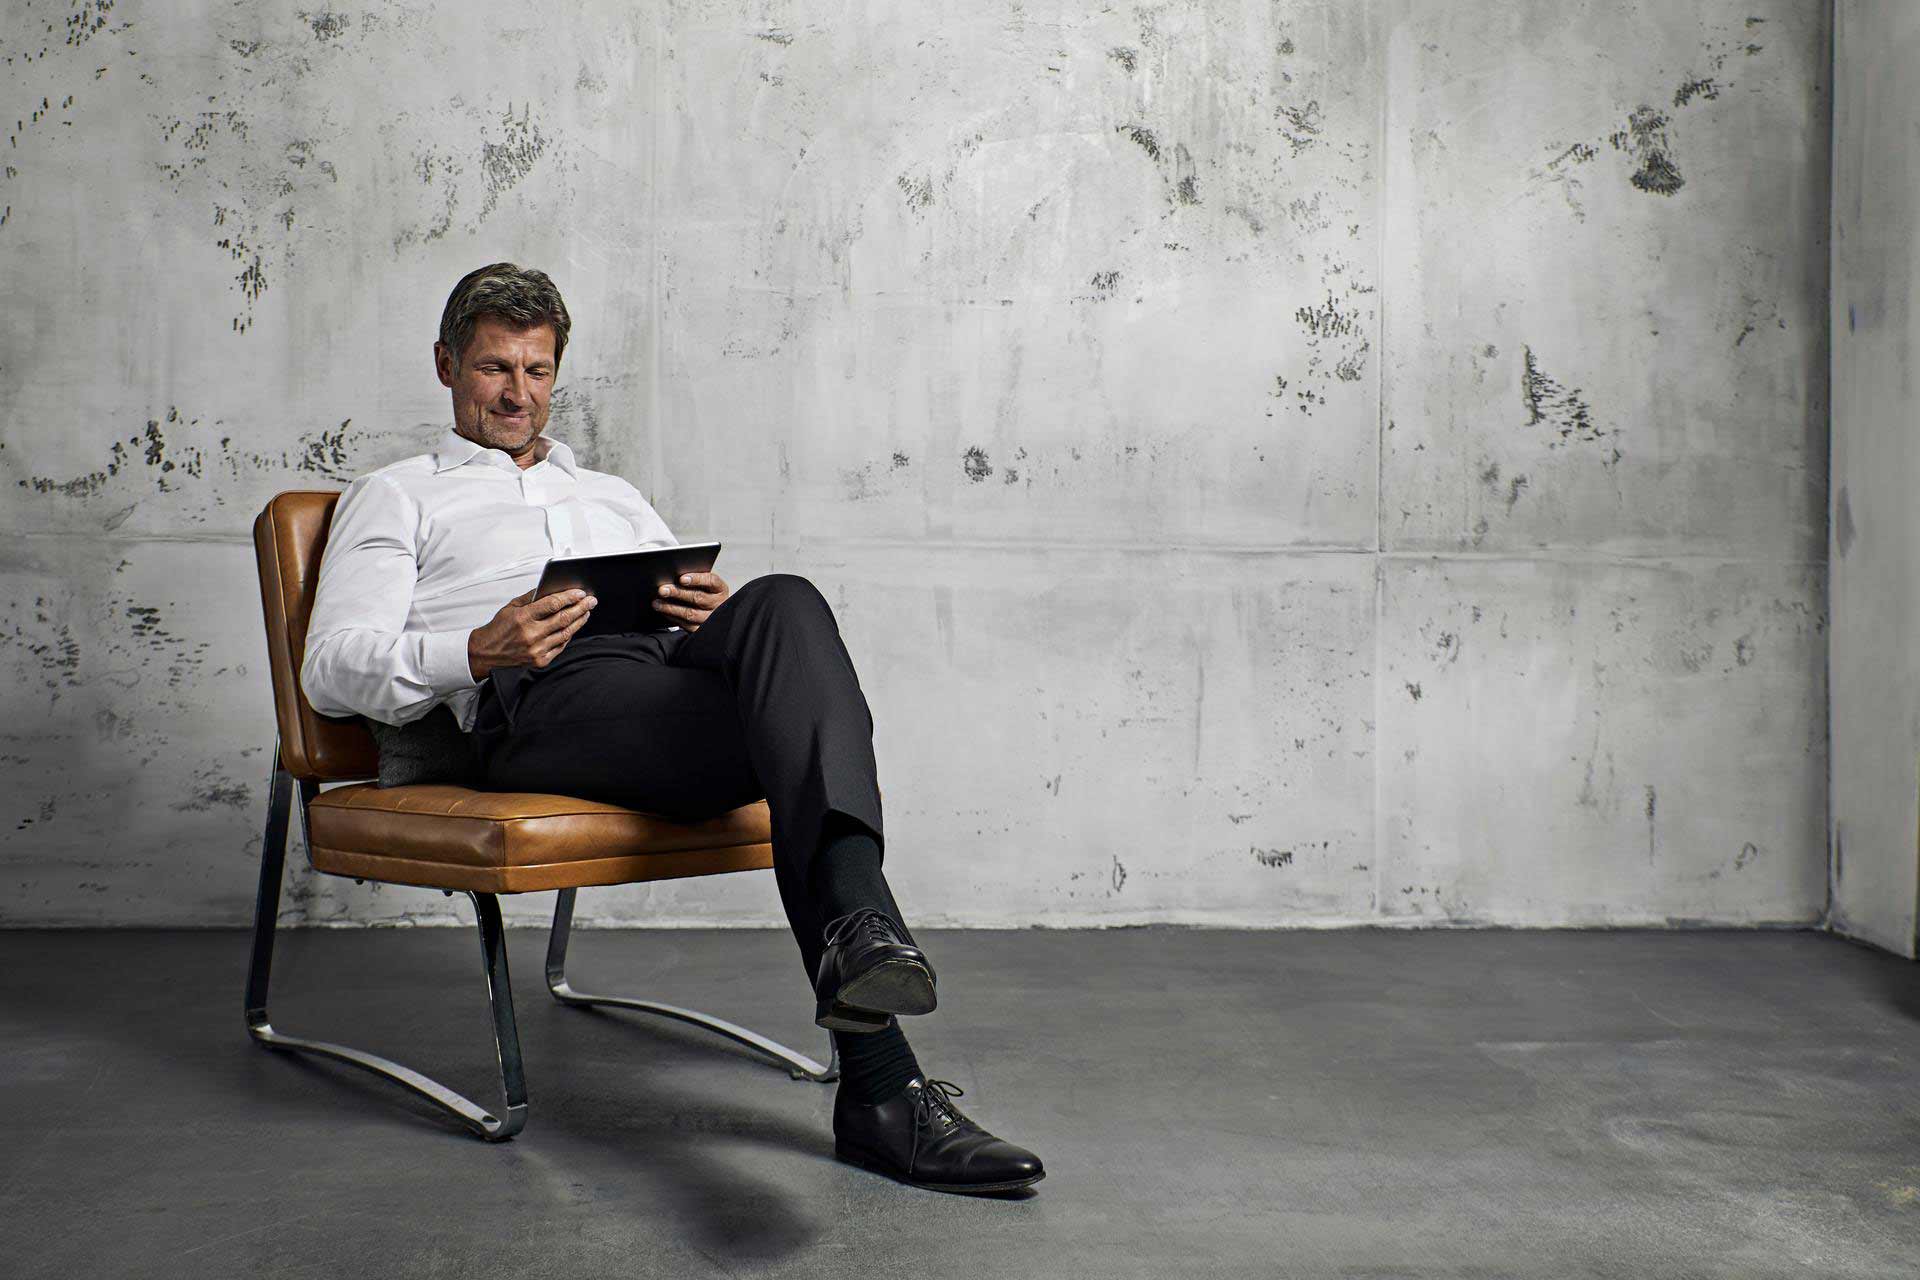 A man looks contentedly at his tablet and sits in an armchair